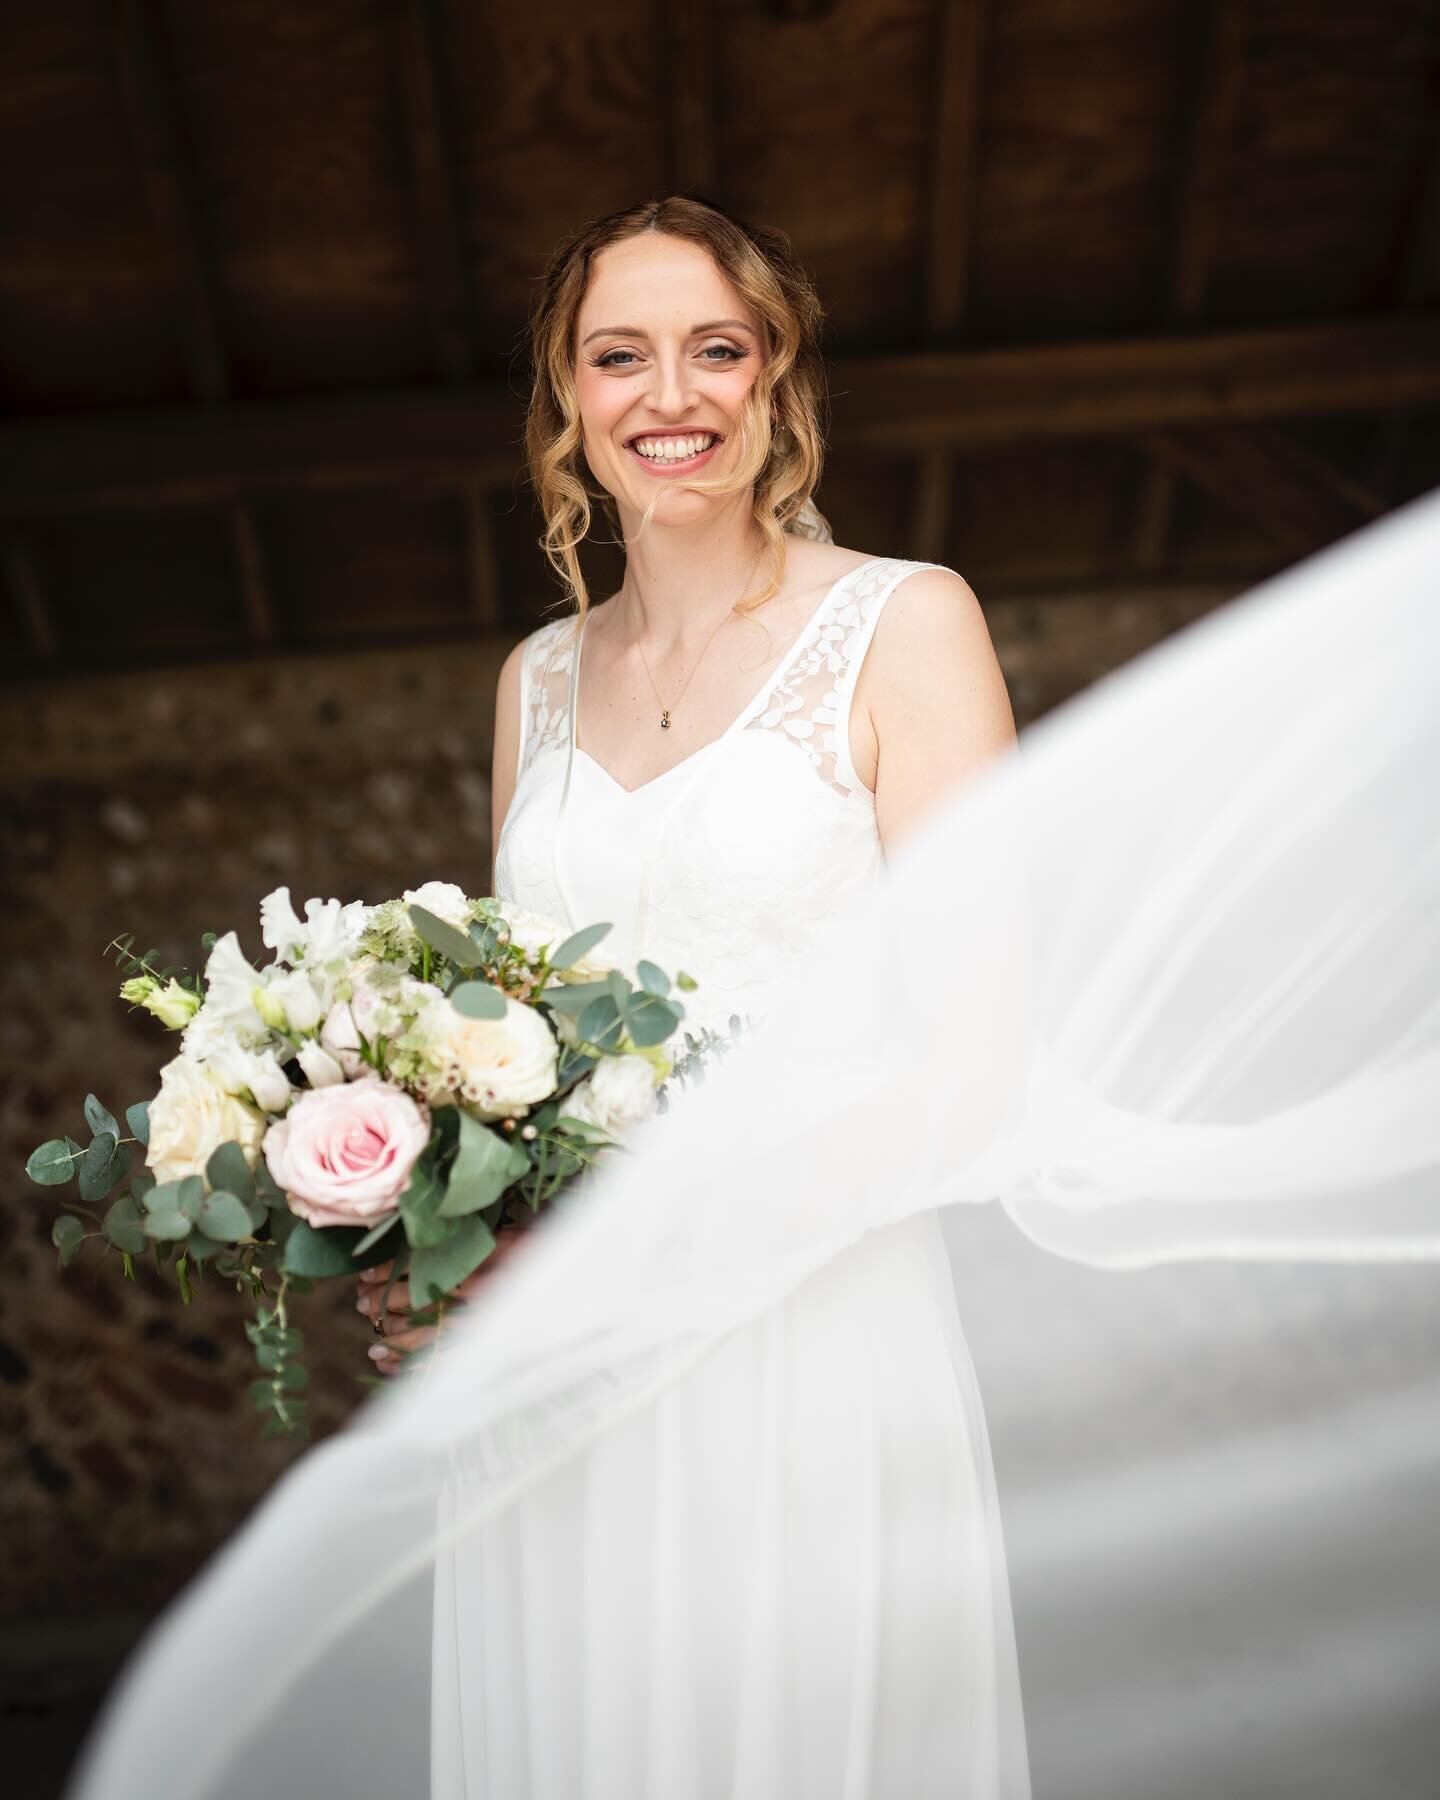 Steph &hellip; such a relaxed morning getting ready with her lovely family at the stunning Flint Barns @rathfinnyestate 

The time on a wedding morning just goes in a flash&hellip; so it is always good to plan a little breathing space when all the pr